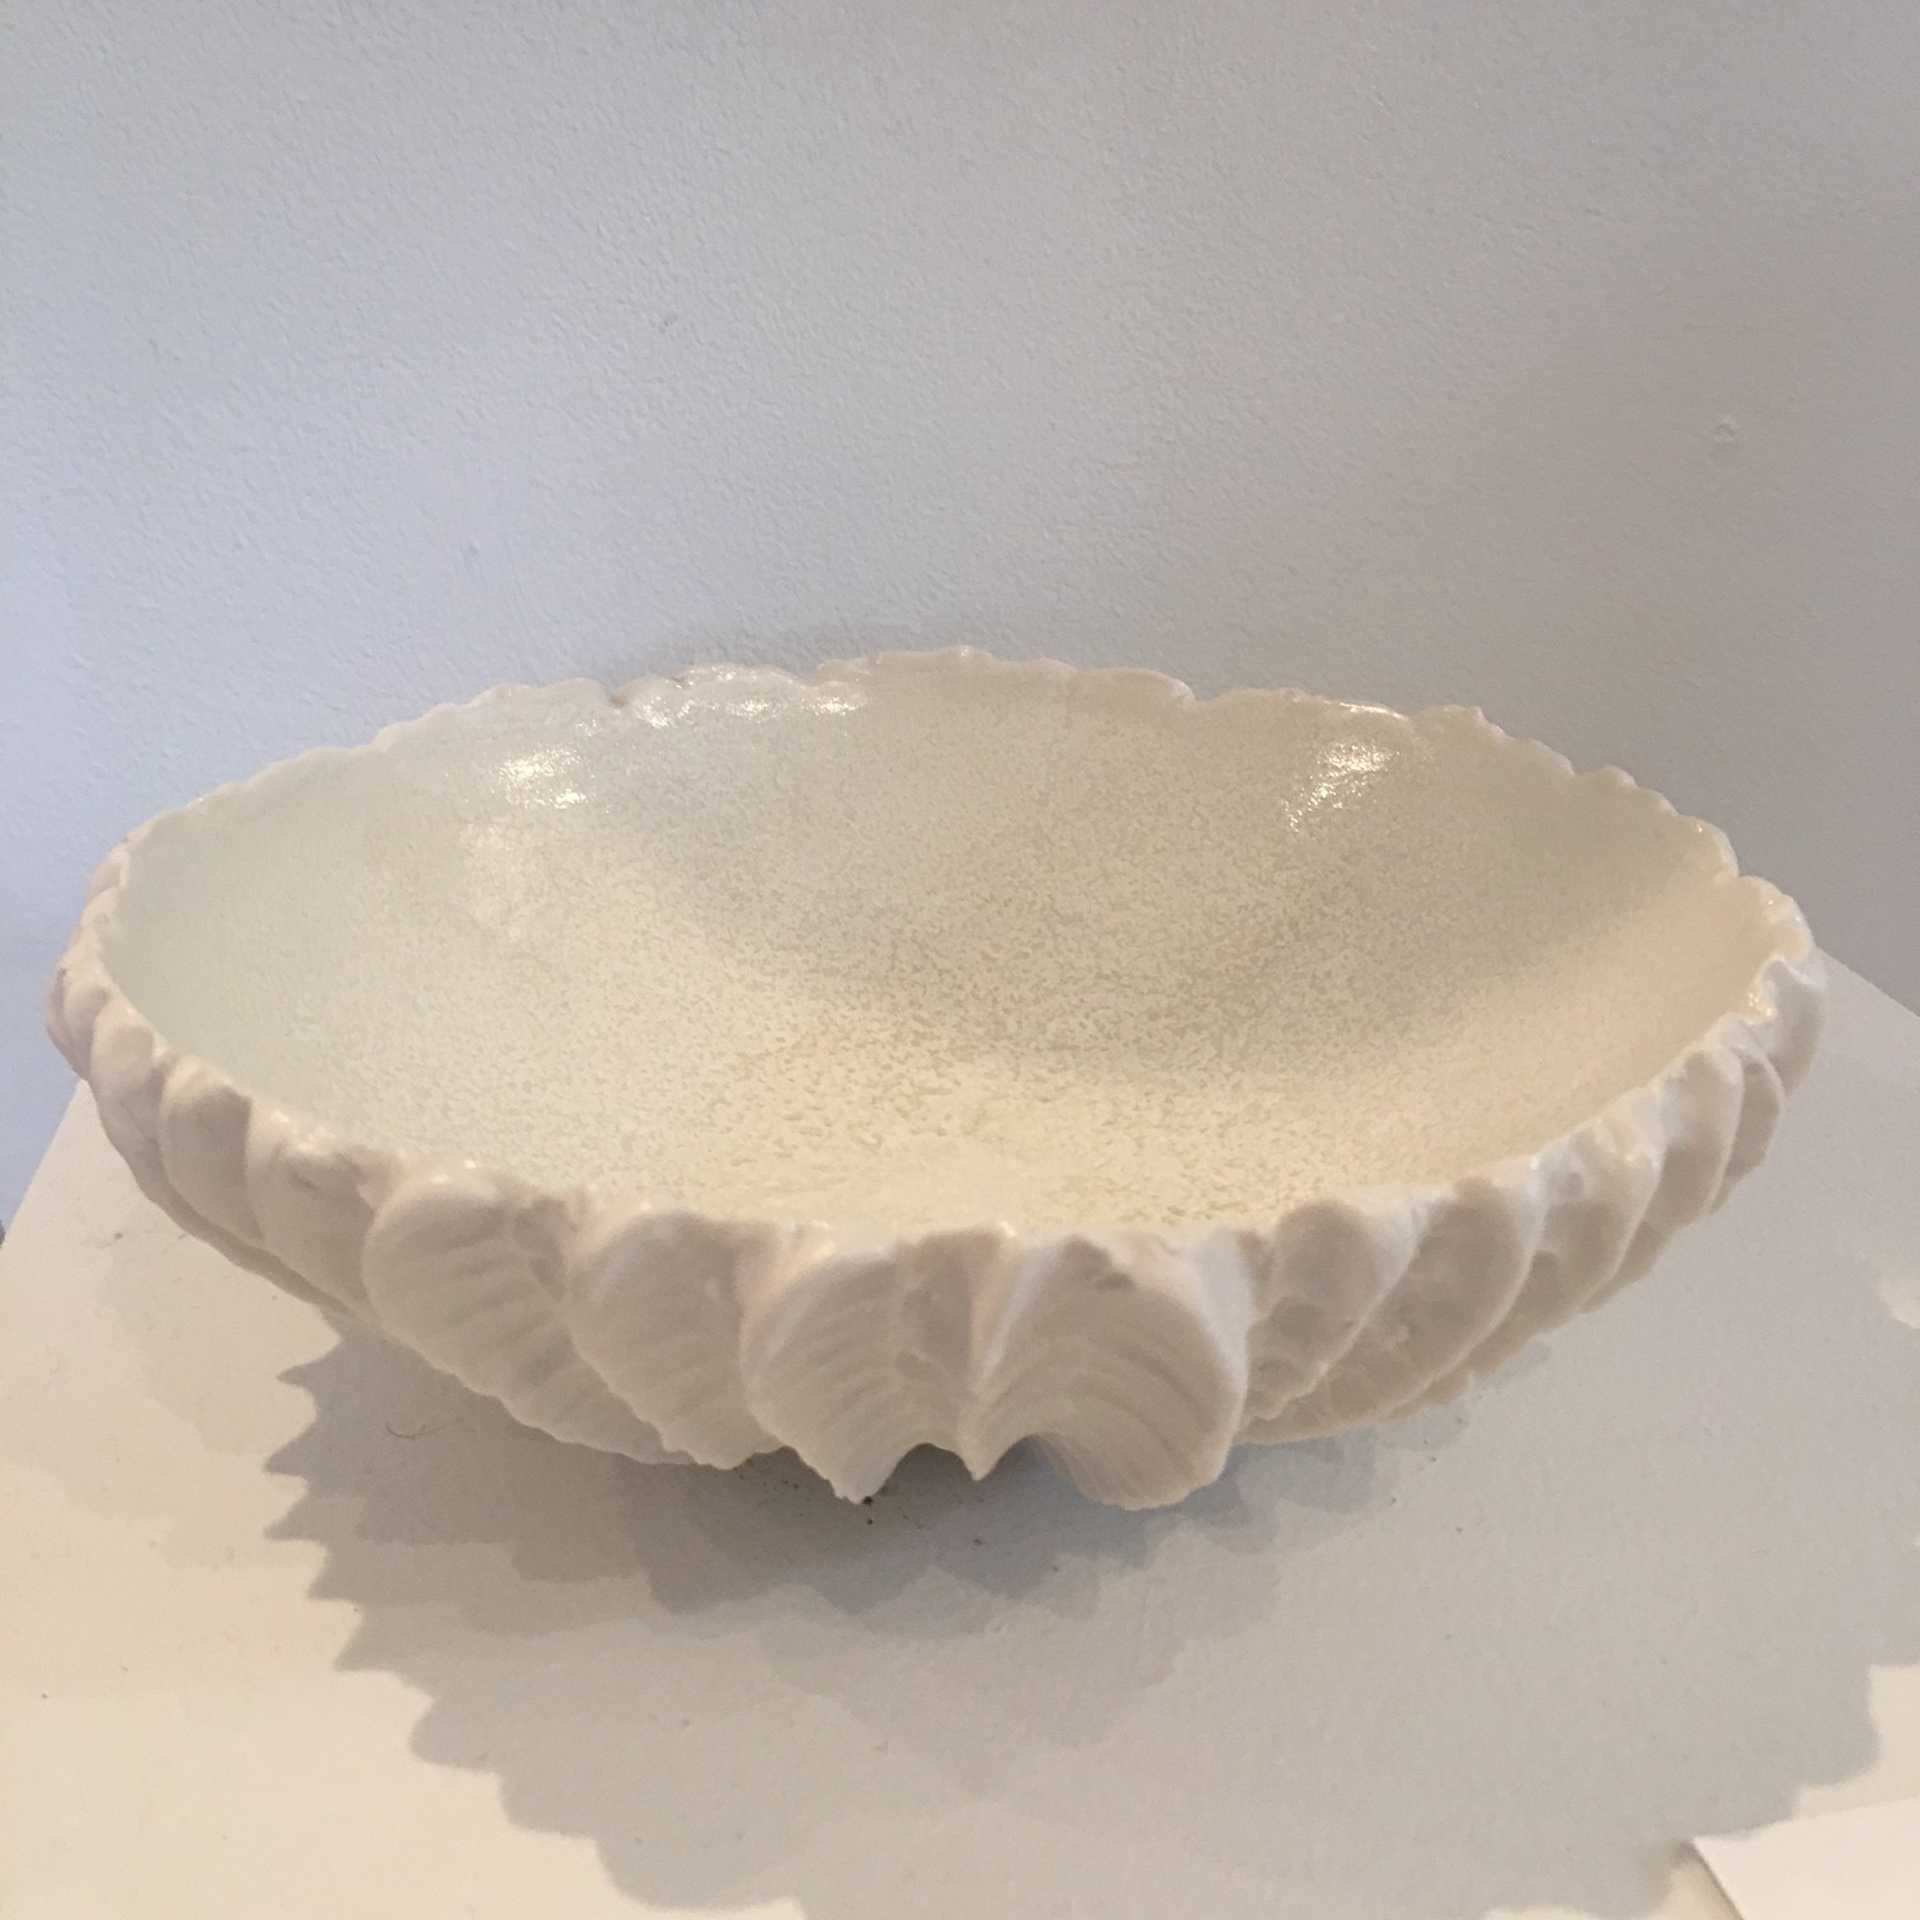 scallop Bowl with Snowflake Interiorl by Heather Knight